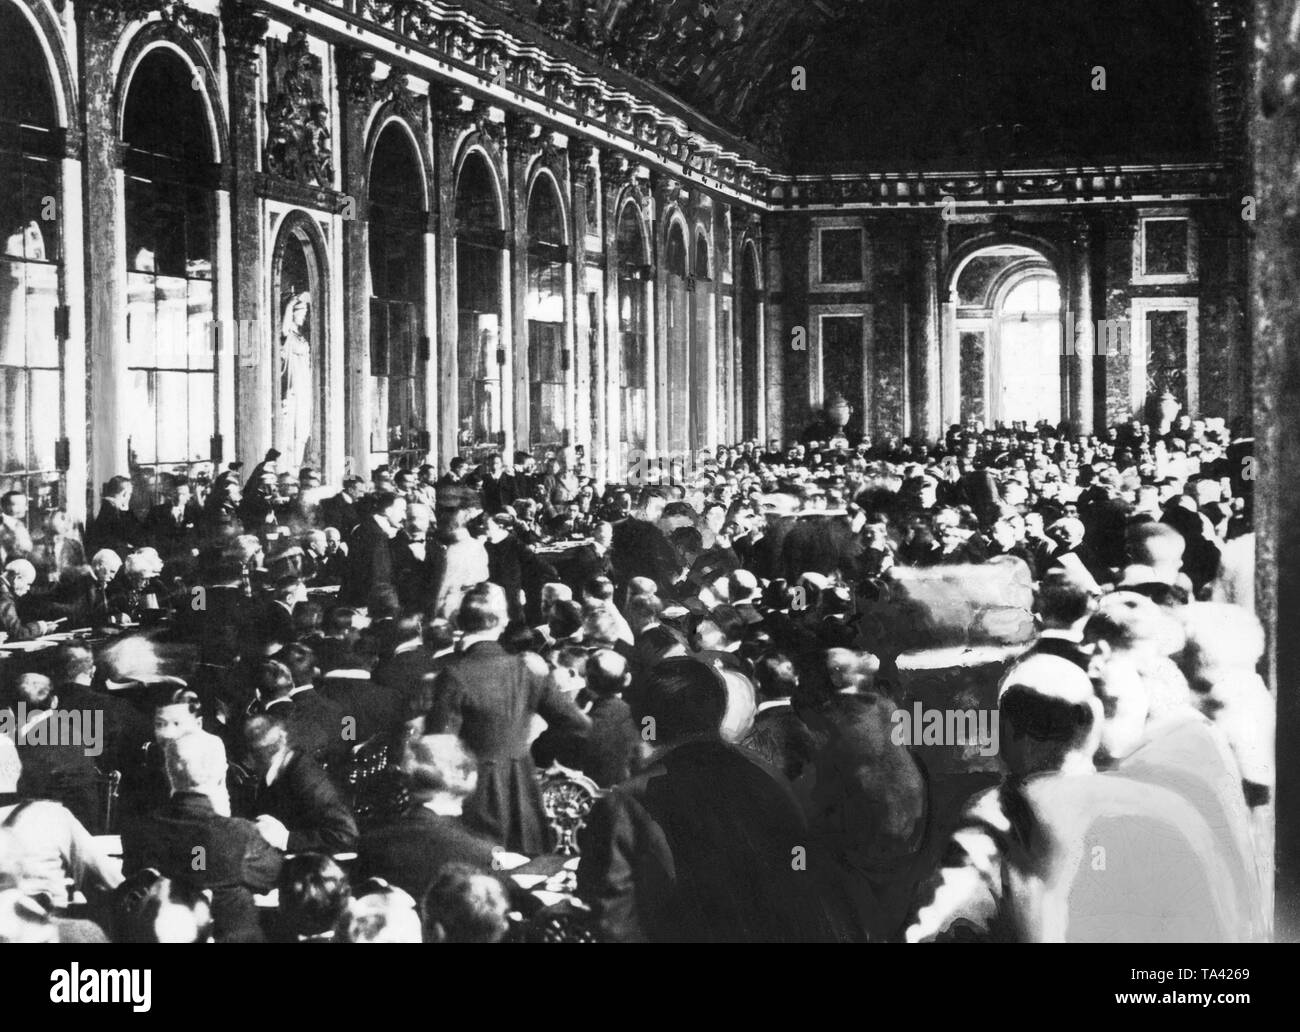 The German Foreign Minister Hermann Mueller and the Minister of Transport Johannes Bell sign the Treaty of Versailles. Hundreds of people are present in the Mirror Hall of Versailles. The German National Assembly has authorized the government to sign only after weeks of struggle. Stock Photo